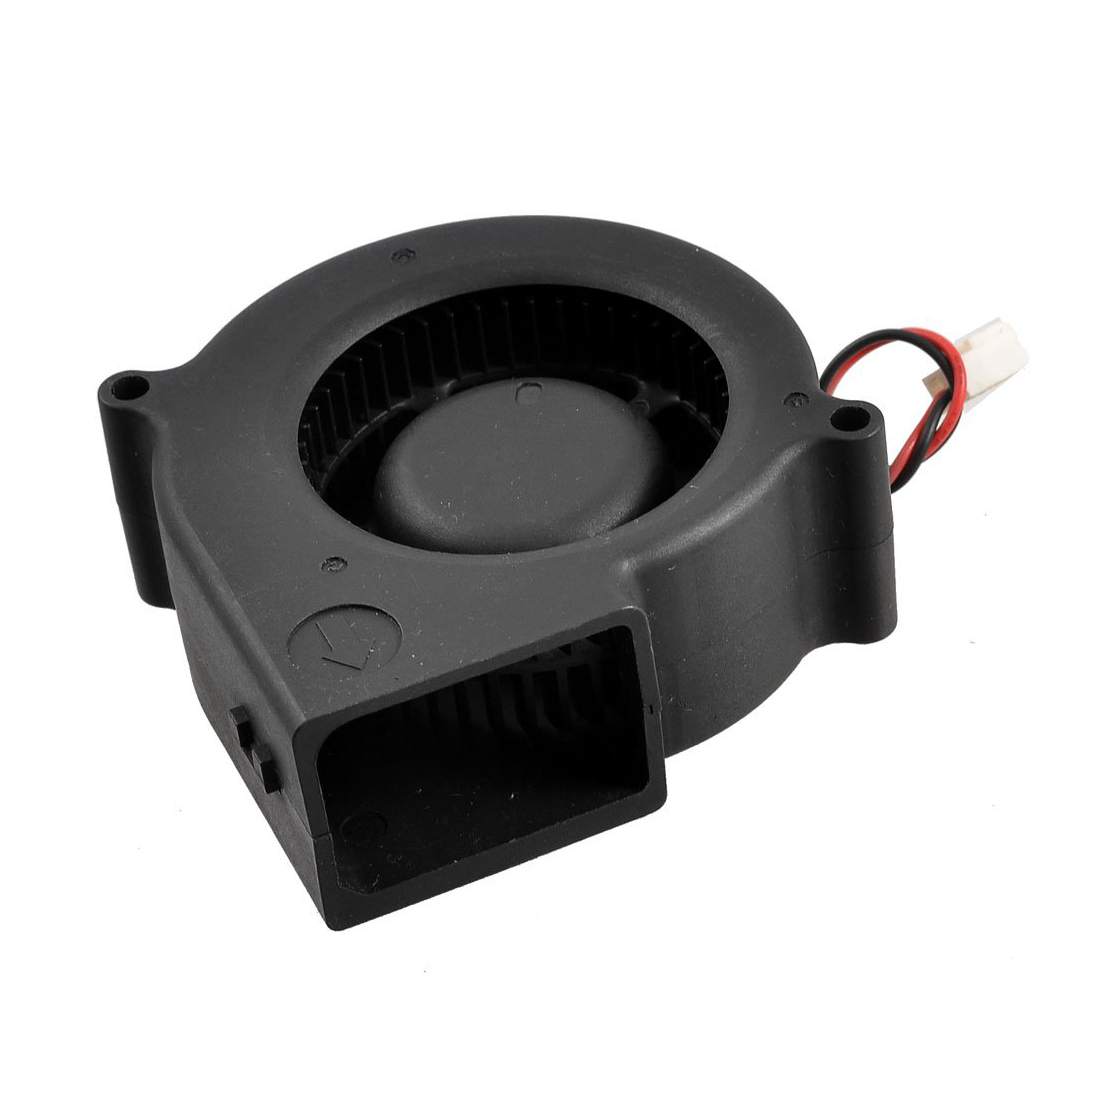 PROMOTION! 75mm x 30mm DC 12V 0.36A 2Pin Computer PC Blower Cooling Fan